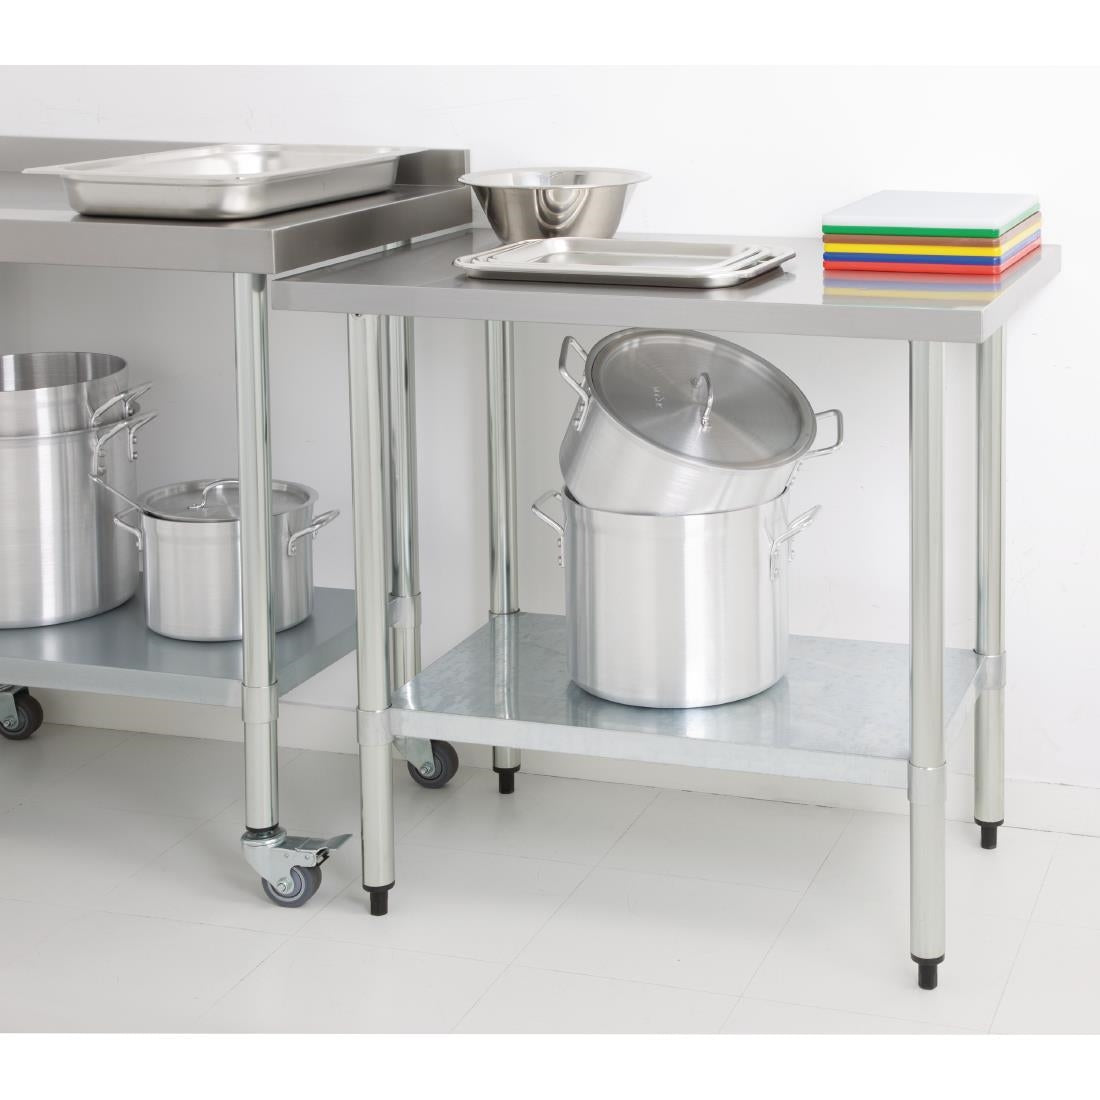 GJ500 Vogue Stainless Steel Prep Table 600mm JD Catering Equipment Solutions Ltd